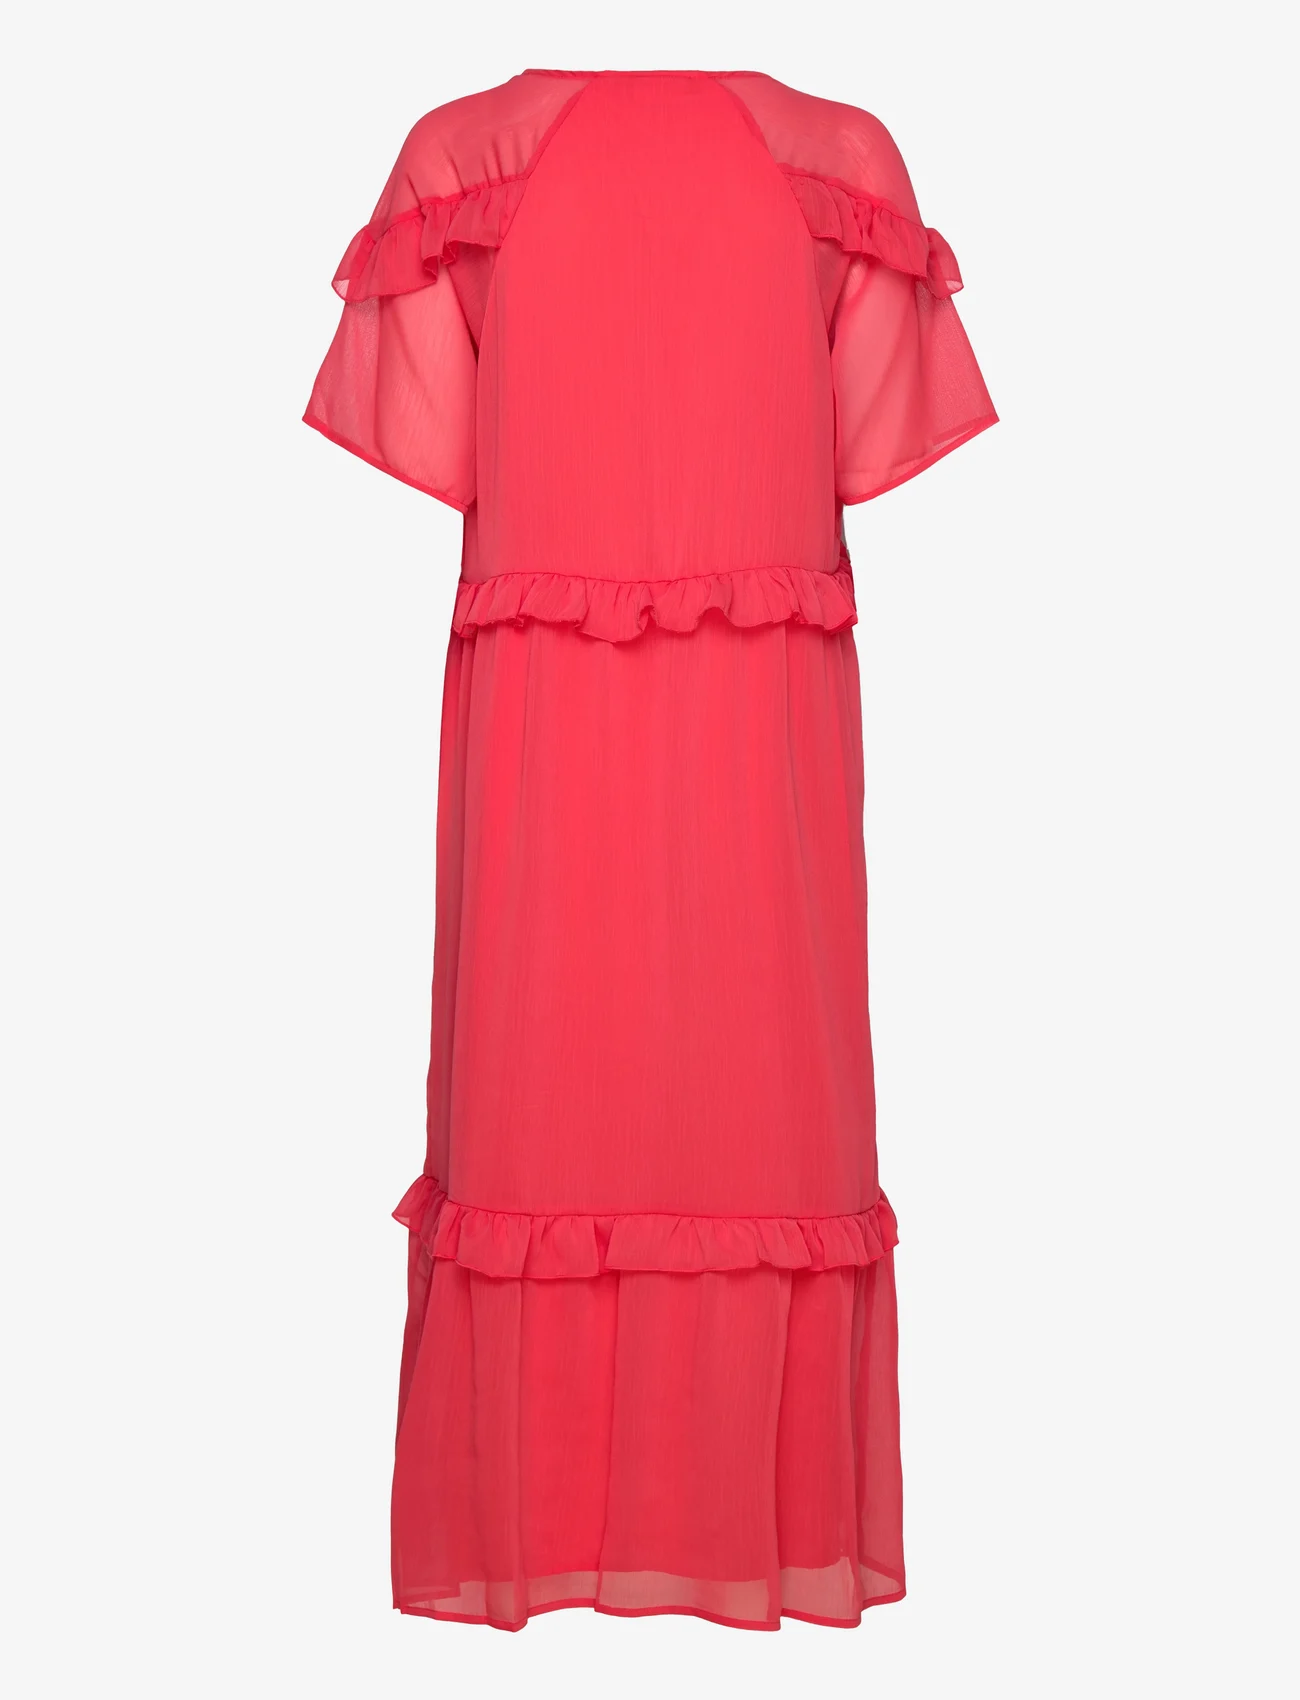 Coster Copenhagen - Long dress with frills - peoriided outlet-hindadega - coral pink - 1